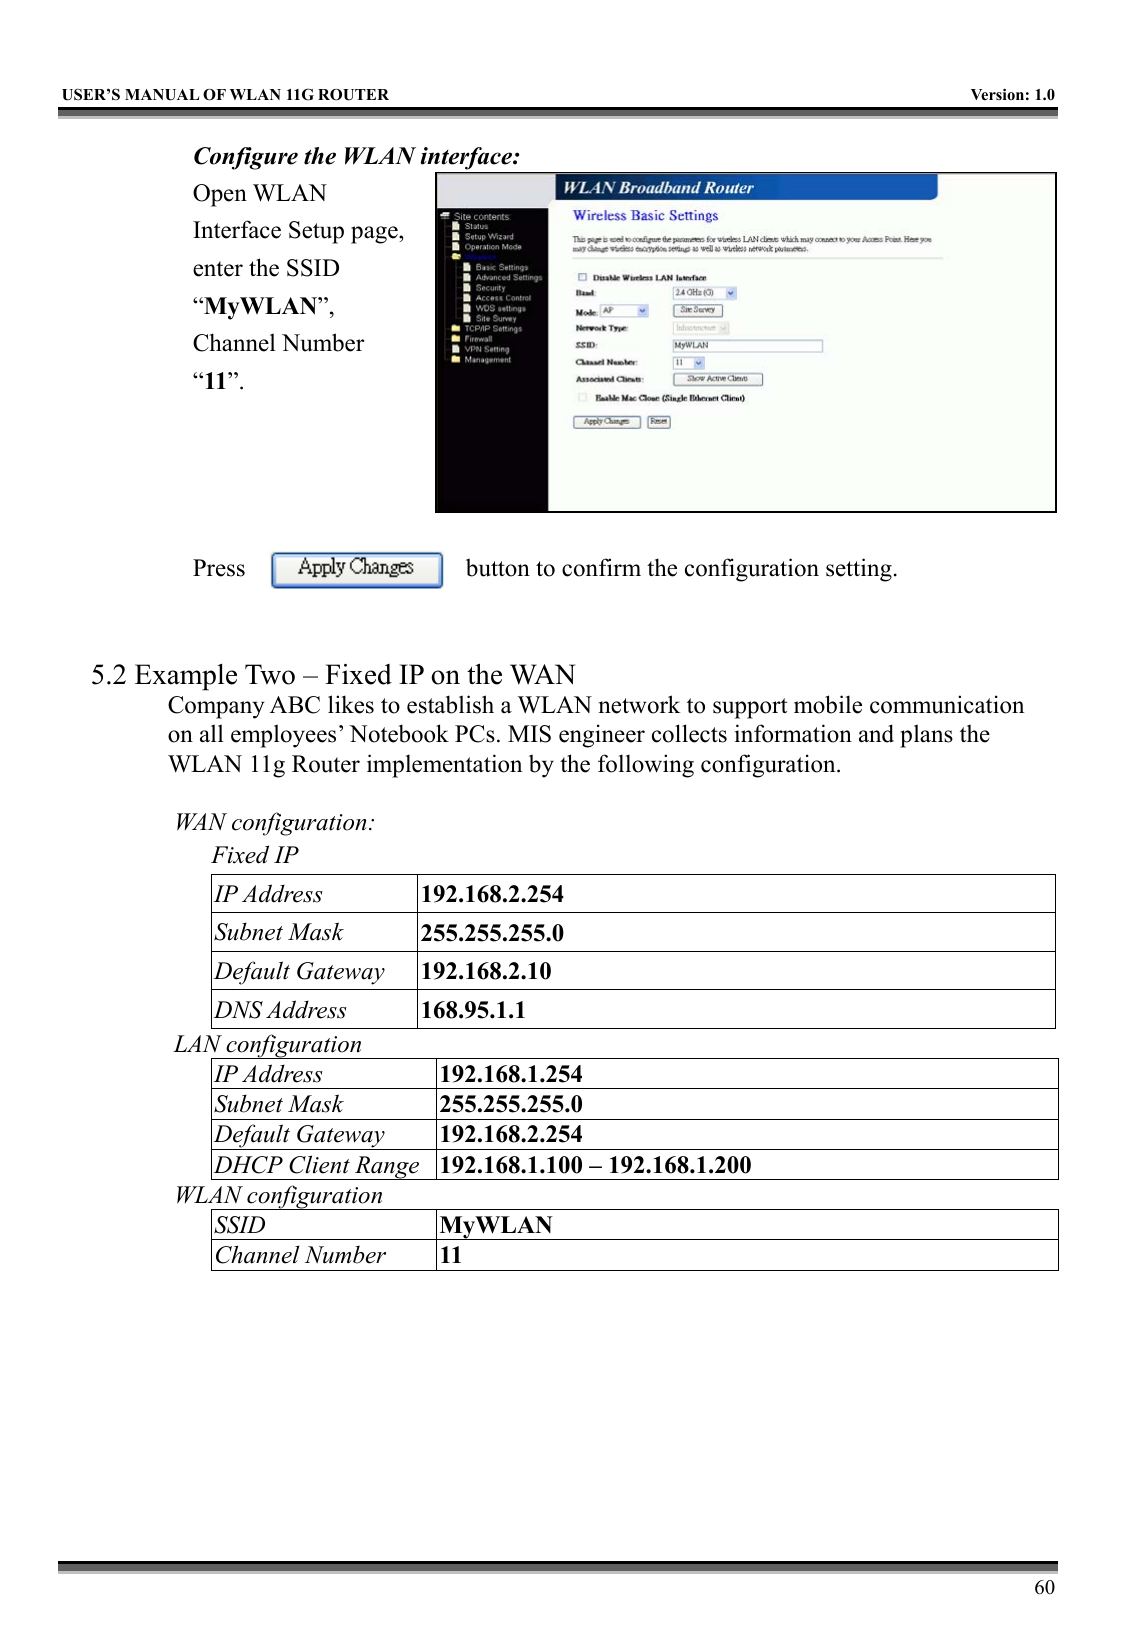   USER’S MANUAL OF WLAN 11G ROUTER    Version: 1.0     60 Configure the WLAN interface:  Open WLAN Interface Setup page, enter the SSID “MyWLAN”, Channel Number “11”.     Press  button to confirm the configuration setting.   5.2 Example Two – Fixed IP on the WAN Company ABC likes to establish a WLAN network to support mobile communication on all employees’ Notebook PCs. MIS engineer collects information and plans the WLAN 11g Router implementation by the following configuration.  WAN configuration:   Fixed IP IP Address  192.168.2.254 Subnet Mask  255.255.255.0 Default Gateway  192.168.2.10 DNS Address  168.95.1.1 LAN configuration IP Address  192.168.1.254 Subnet Mask  255.255.255.0 Default Gateway  192.168.2.254 DHCP Client Range  192.168.1.100 – 192.168.1.200 WLAN configuration SSID  MyWLAN Channel Number  11 